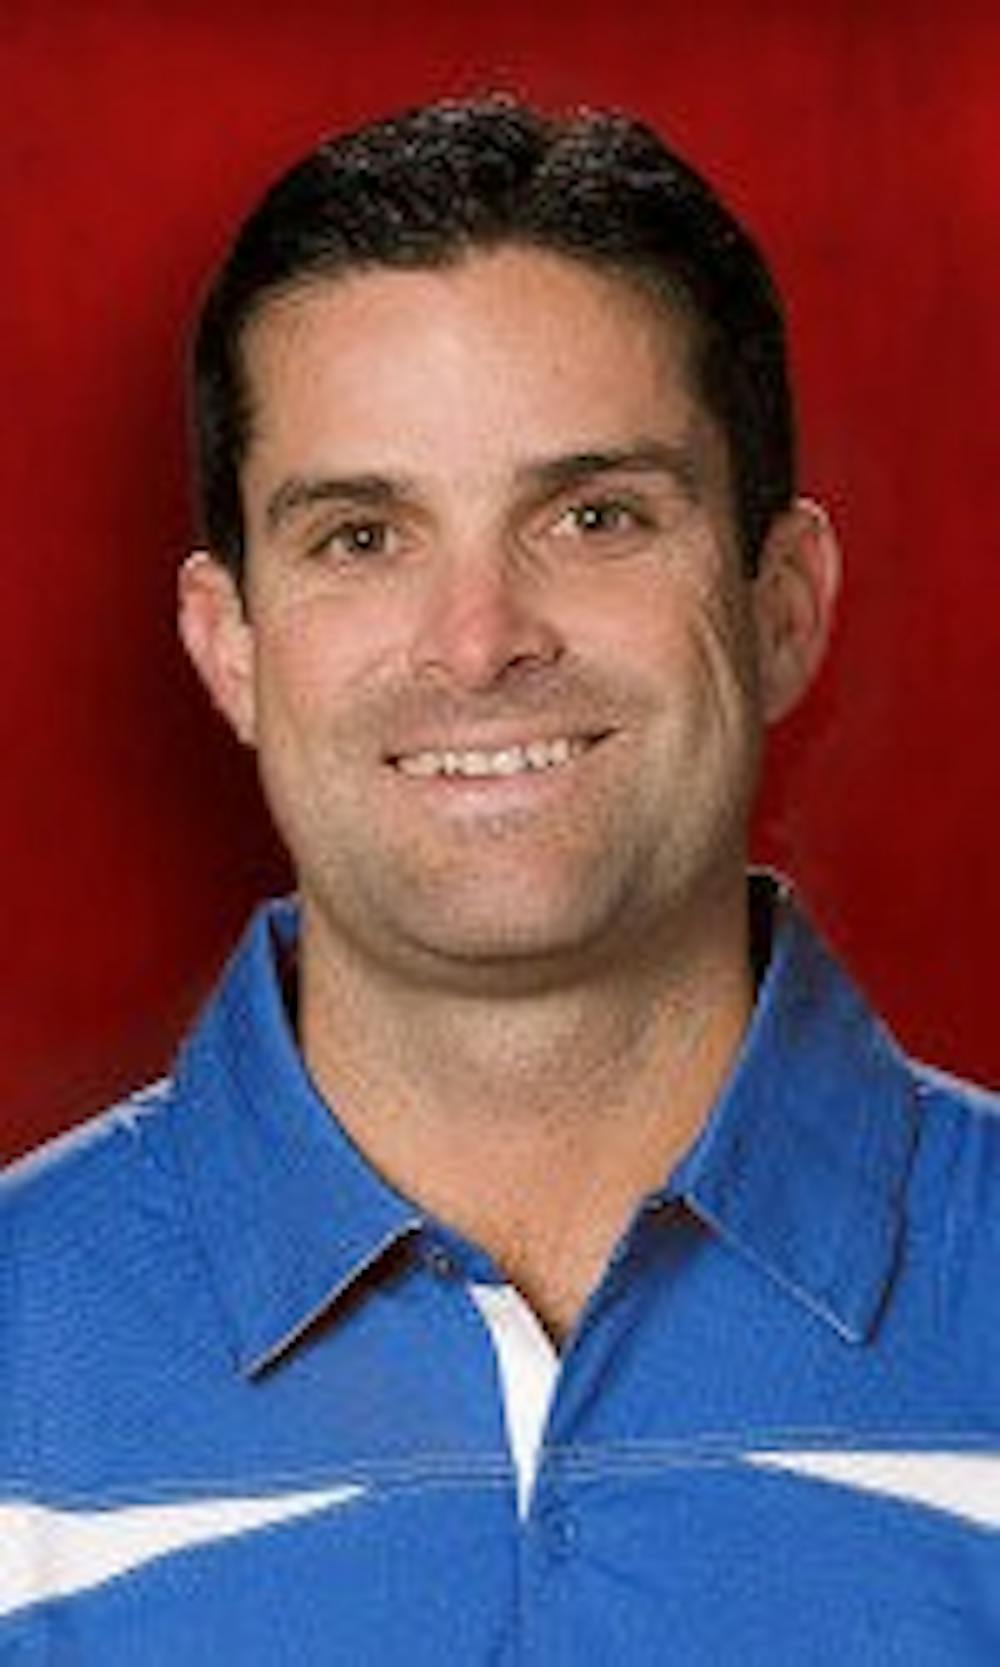 Manny Diaz (Contributed by LaTechSports.com)